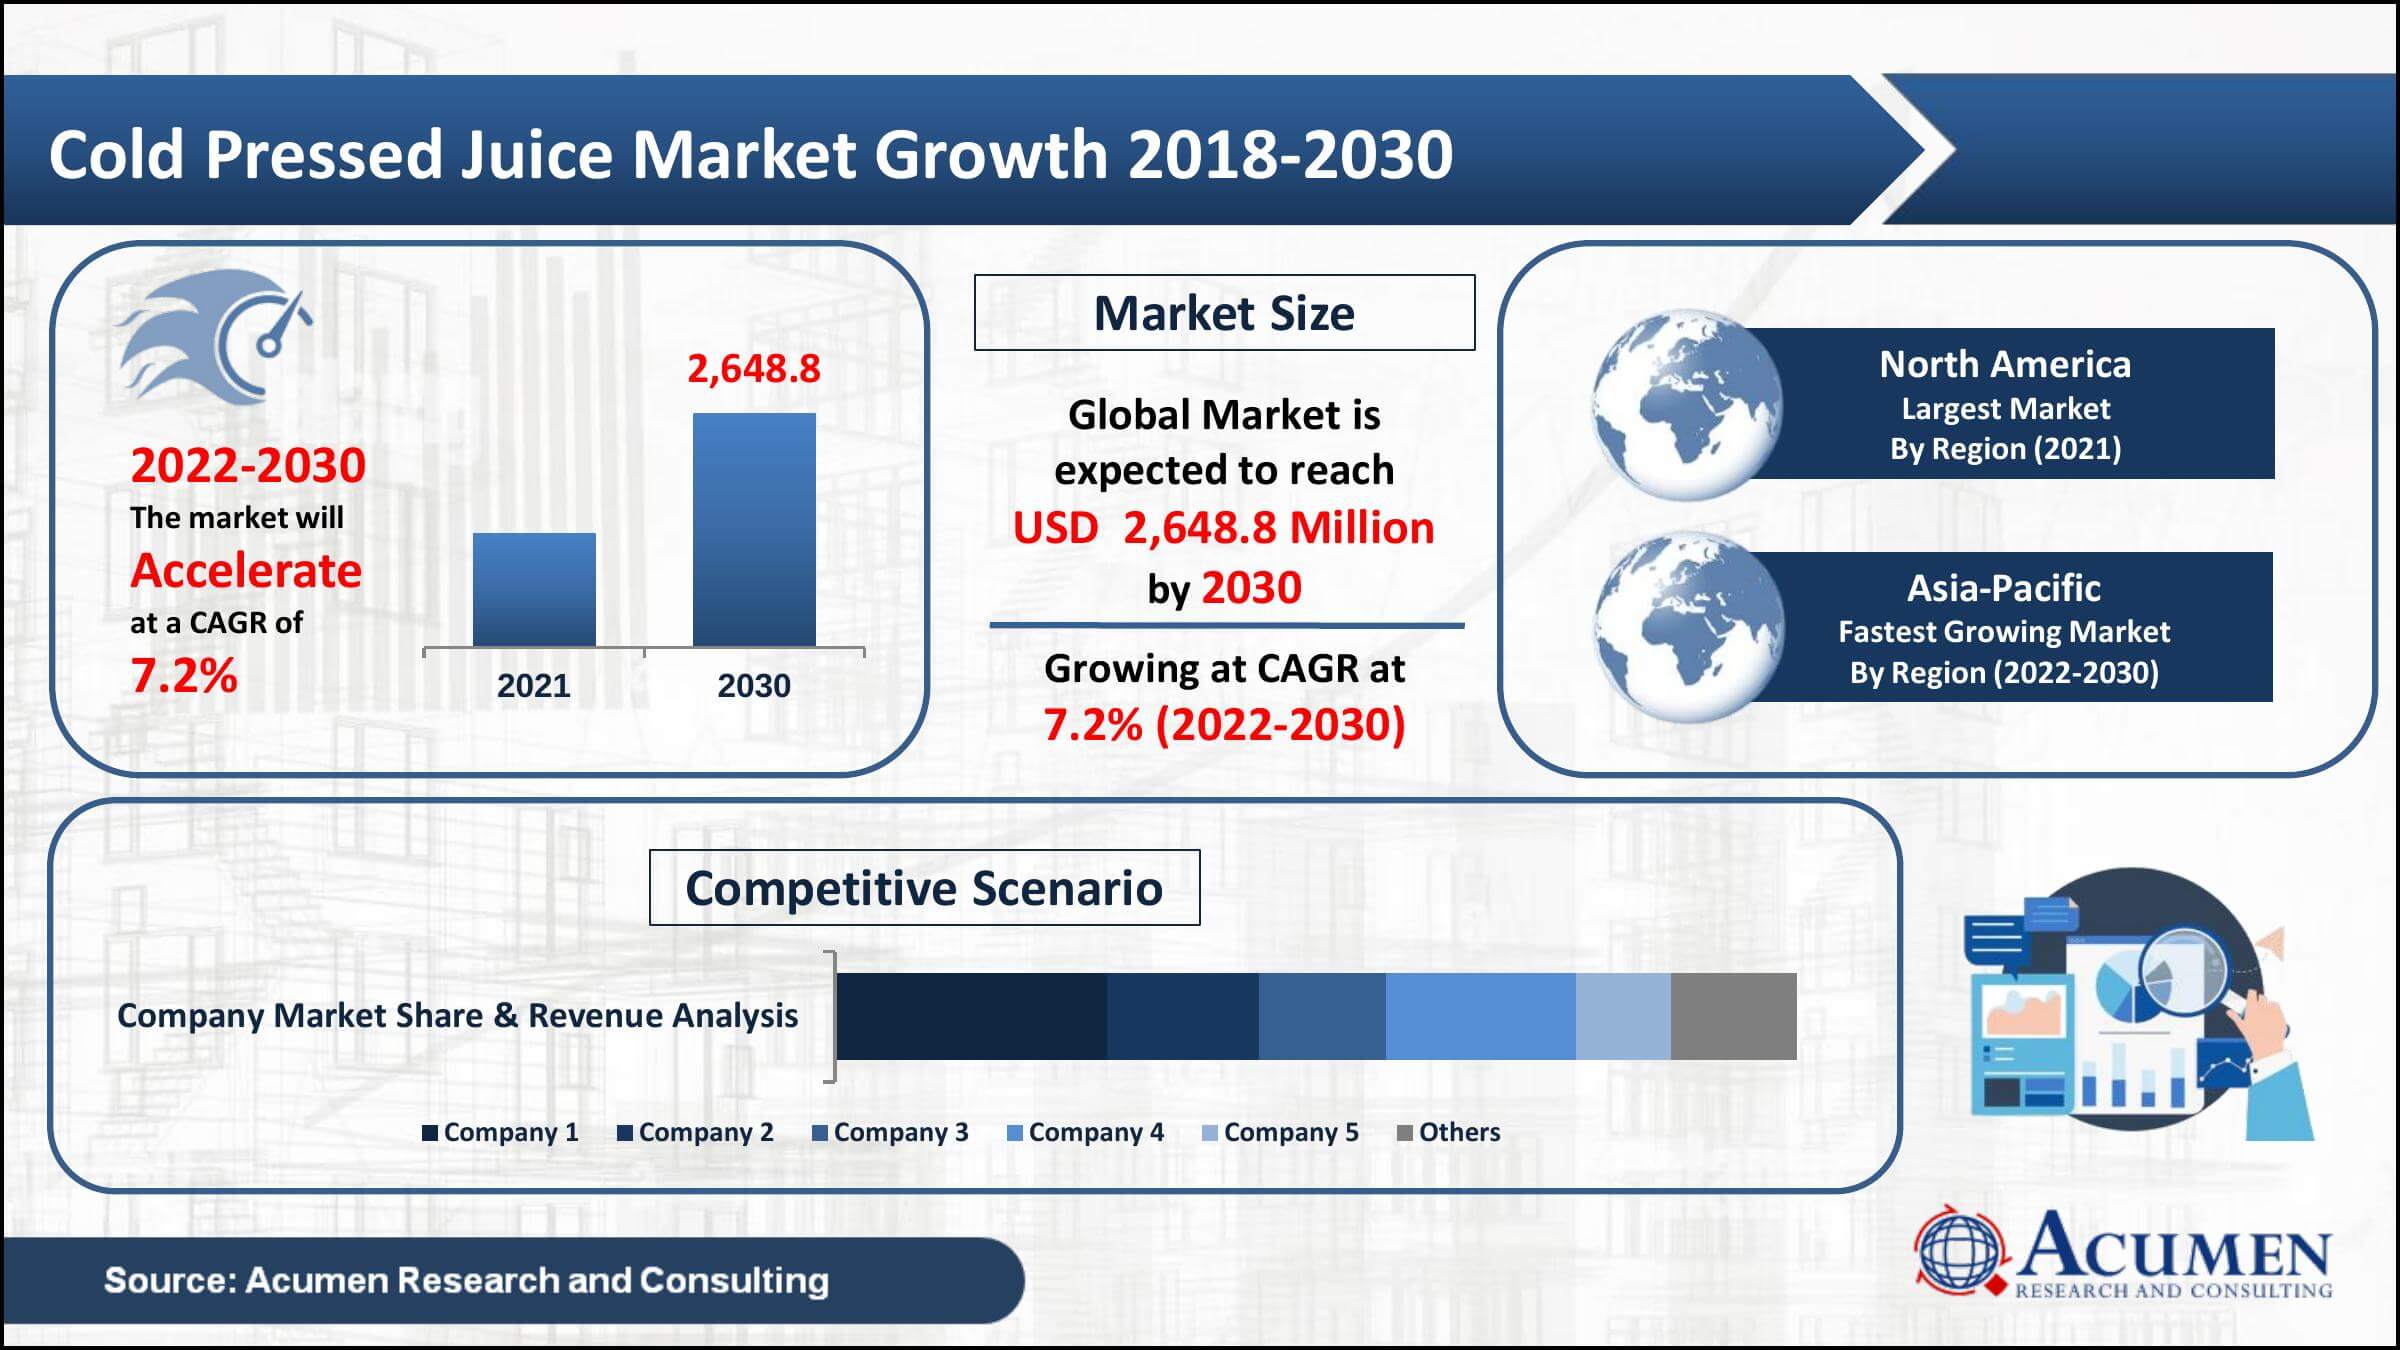 Global cold pressed juice market revenue collected USD 1,452.7 million in 2021, with a 7.2% CAGR between 2022 and 2030